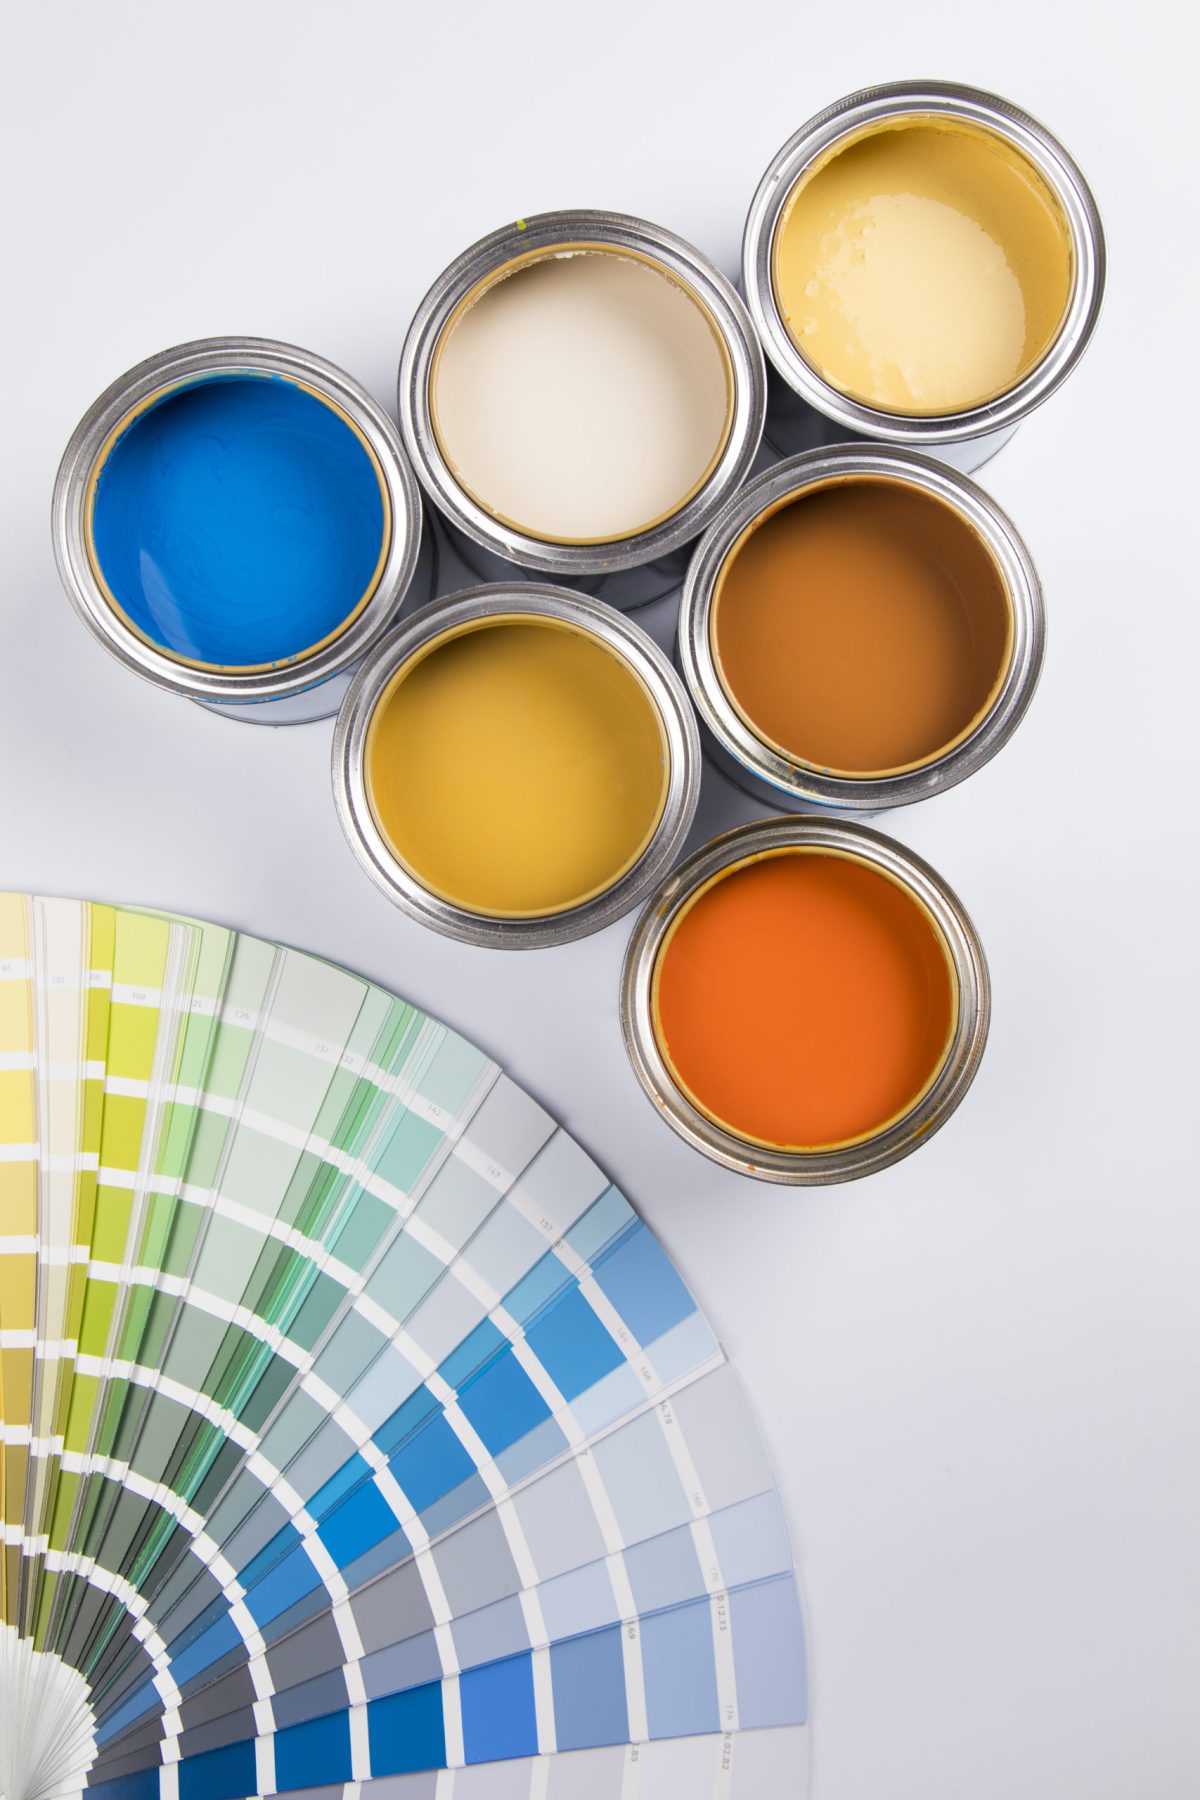 Invest In Paint and Make More on the Sale of Your Orangeville Home